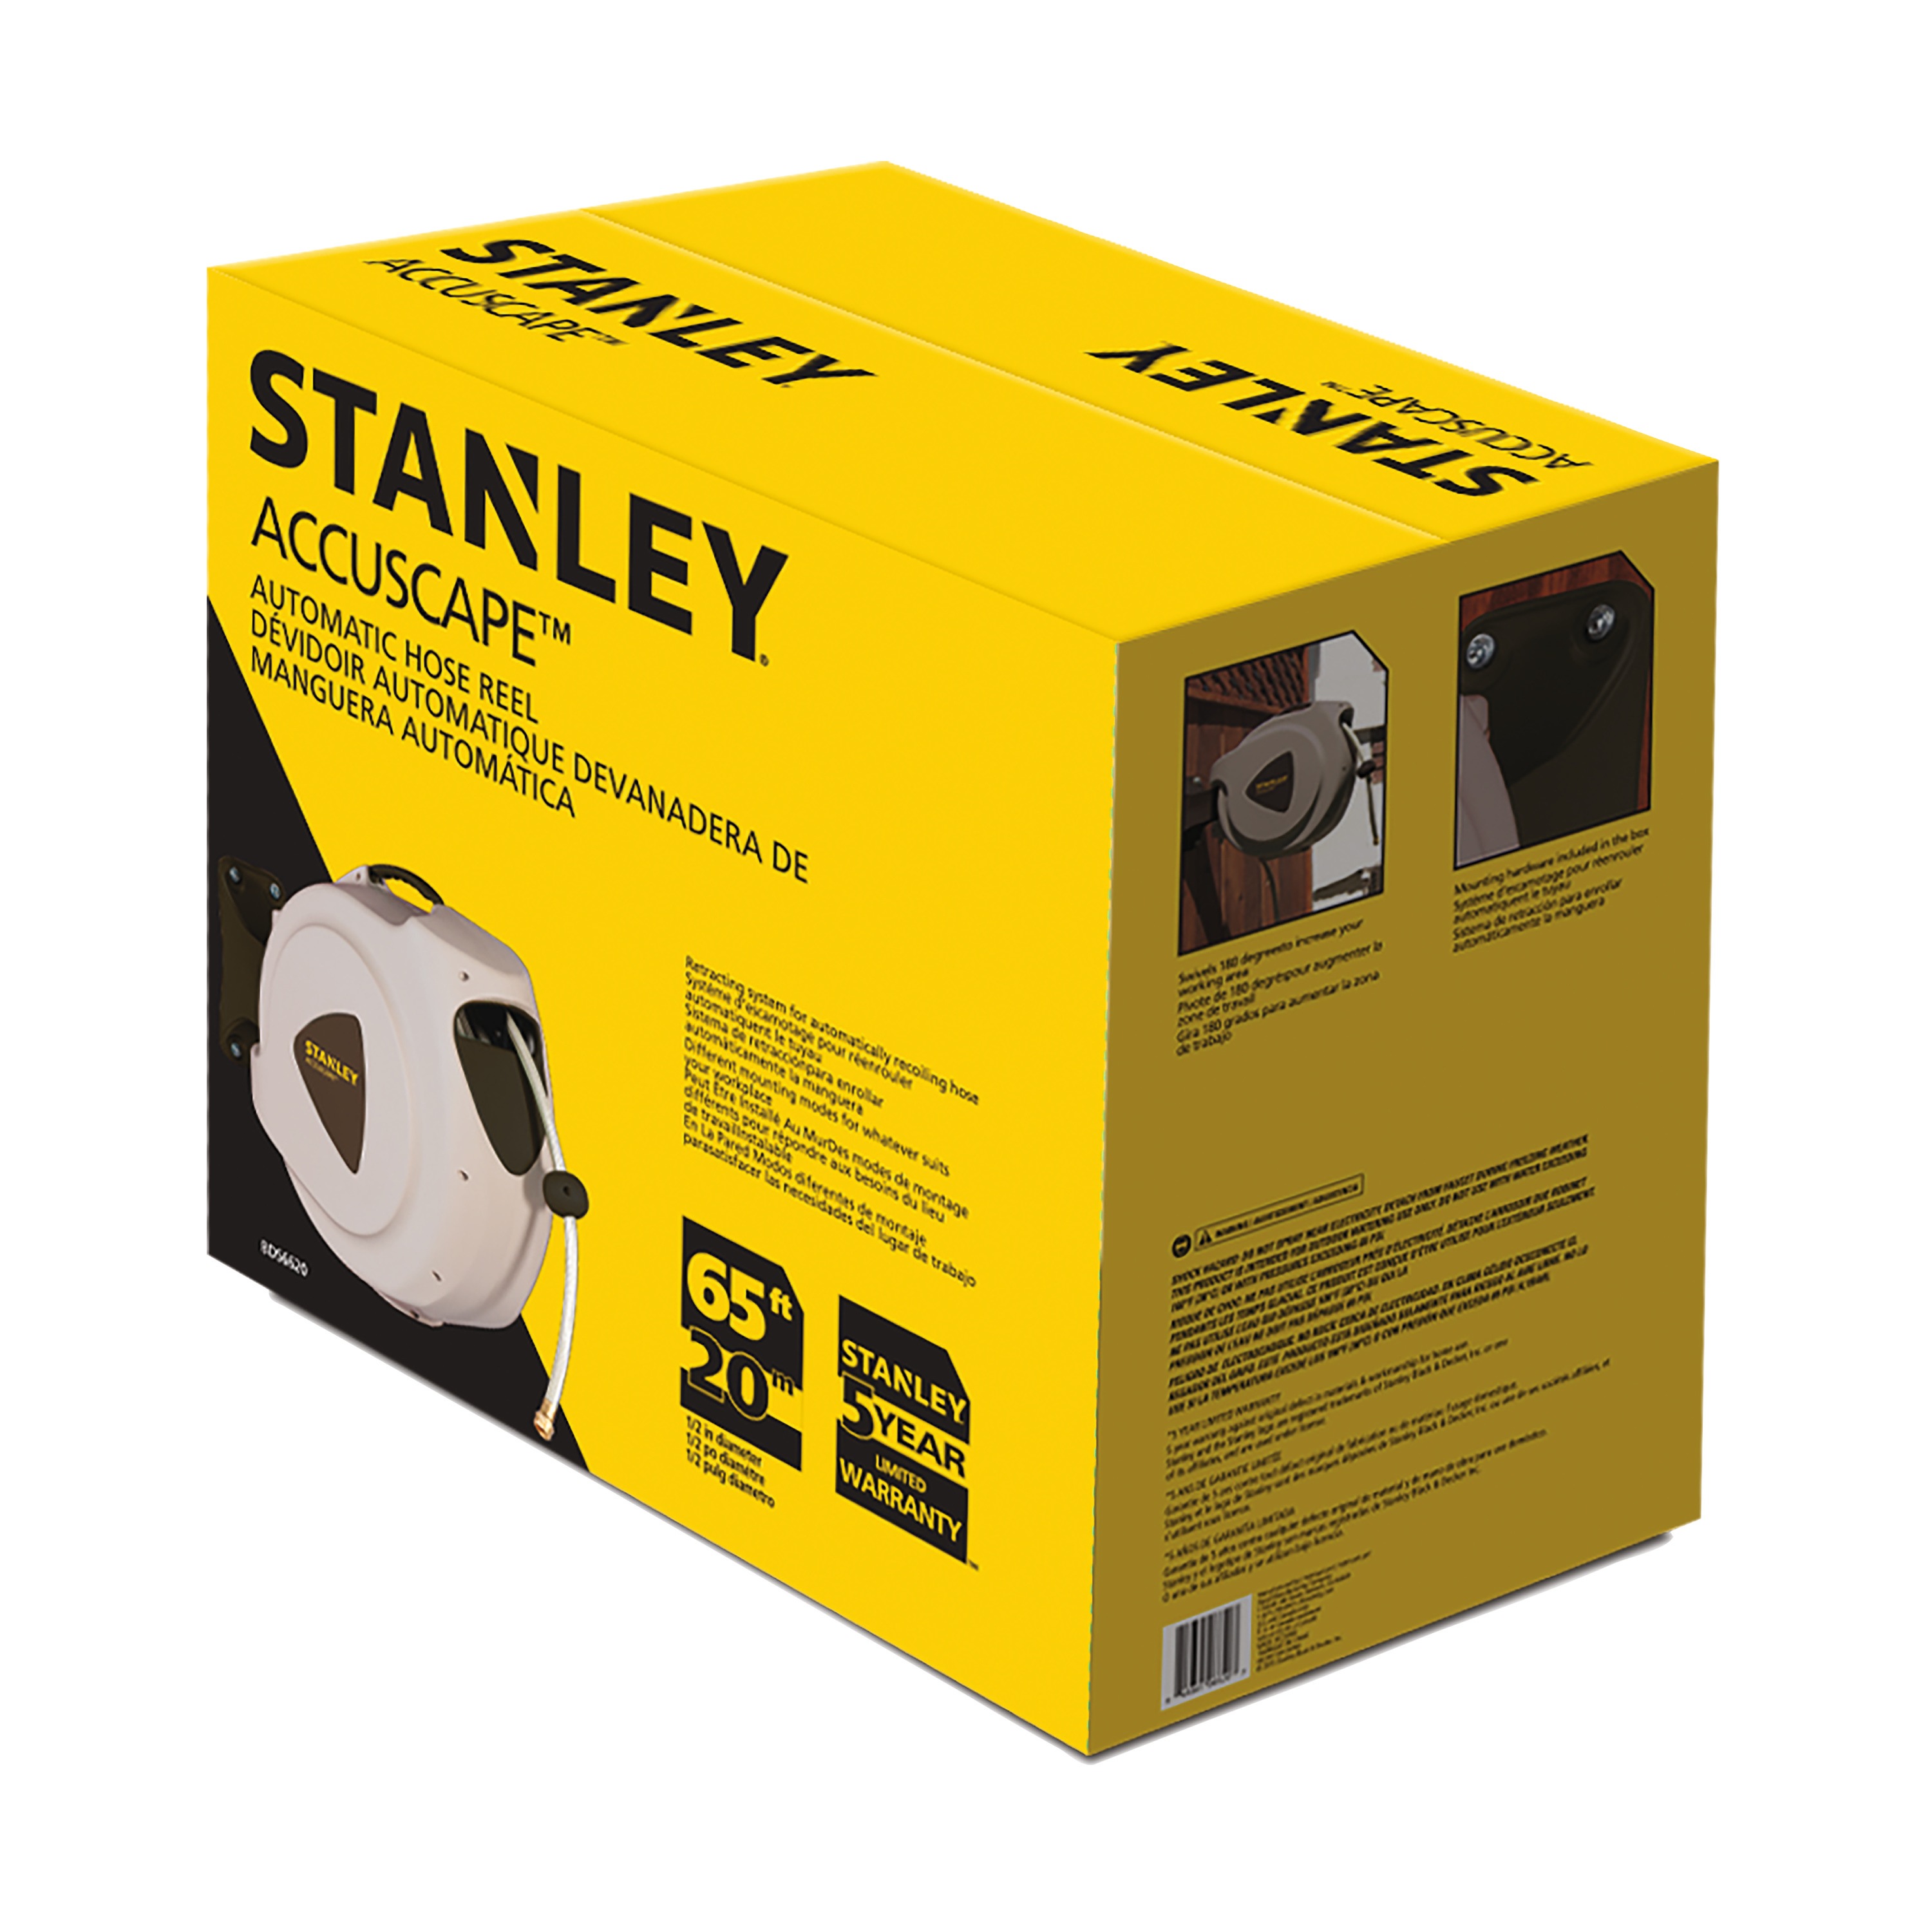 Stanley Tools - ACCUSCAPE PROSERIES 65 ft Automatic Hose Reel - BDS6620